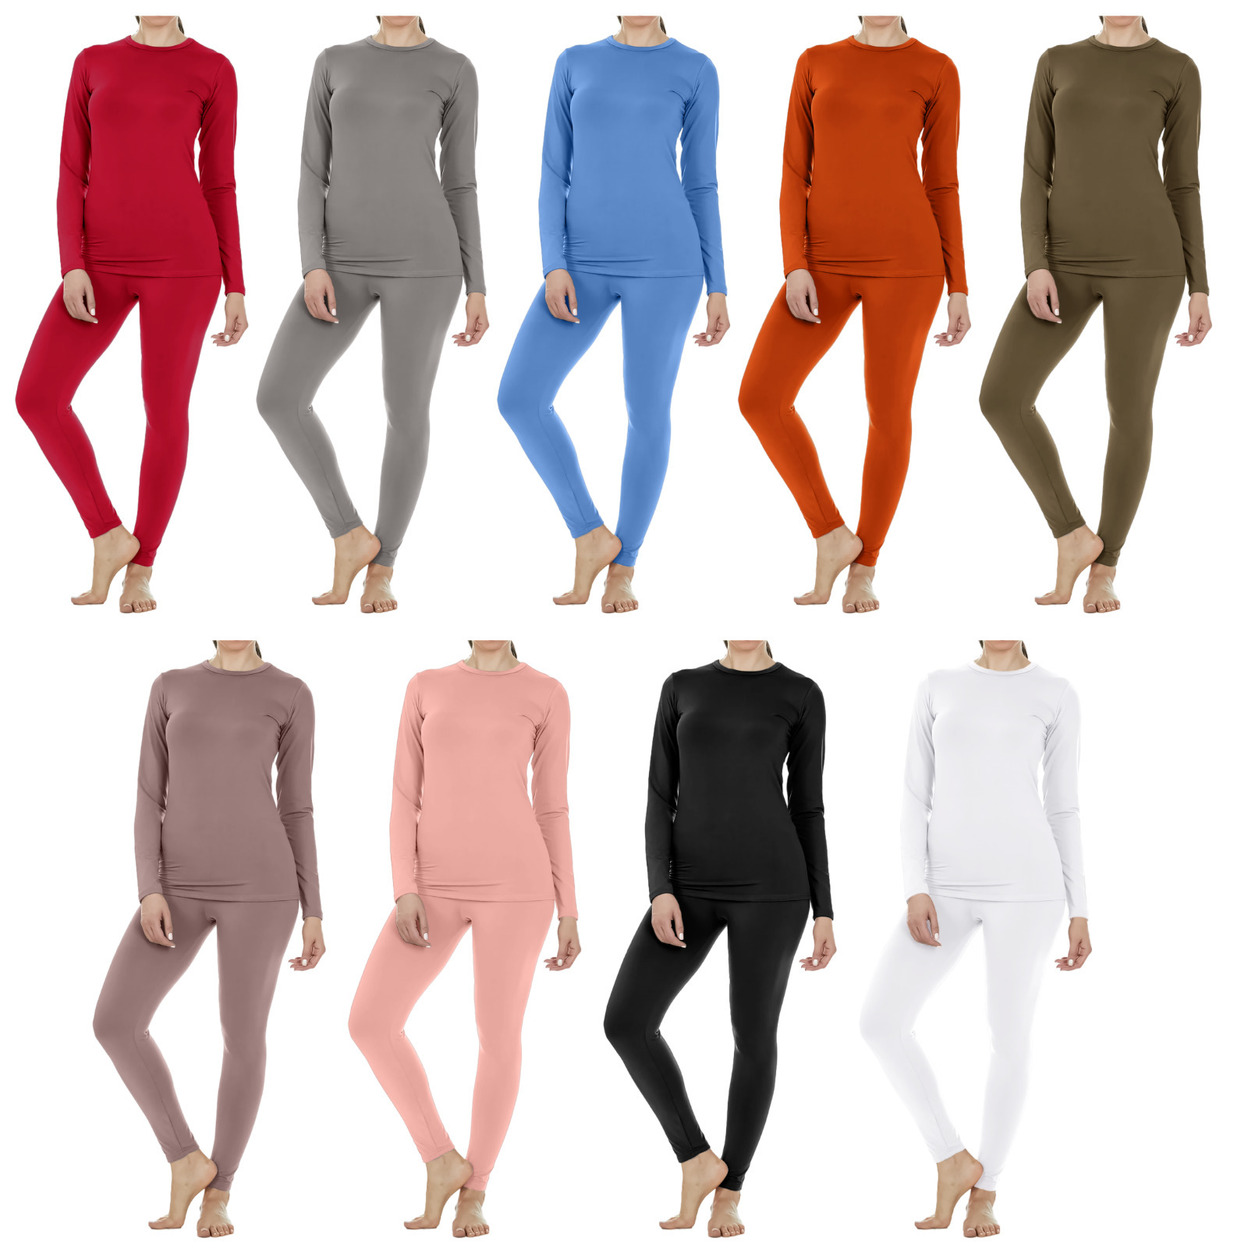 3-Sets: Women's Fleece Lined Winter Warm Soft Thermal Sets For Cold Weather - Small